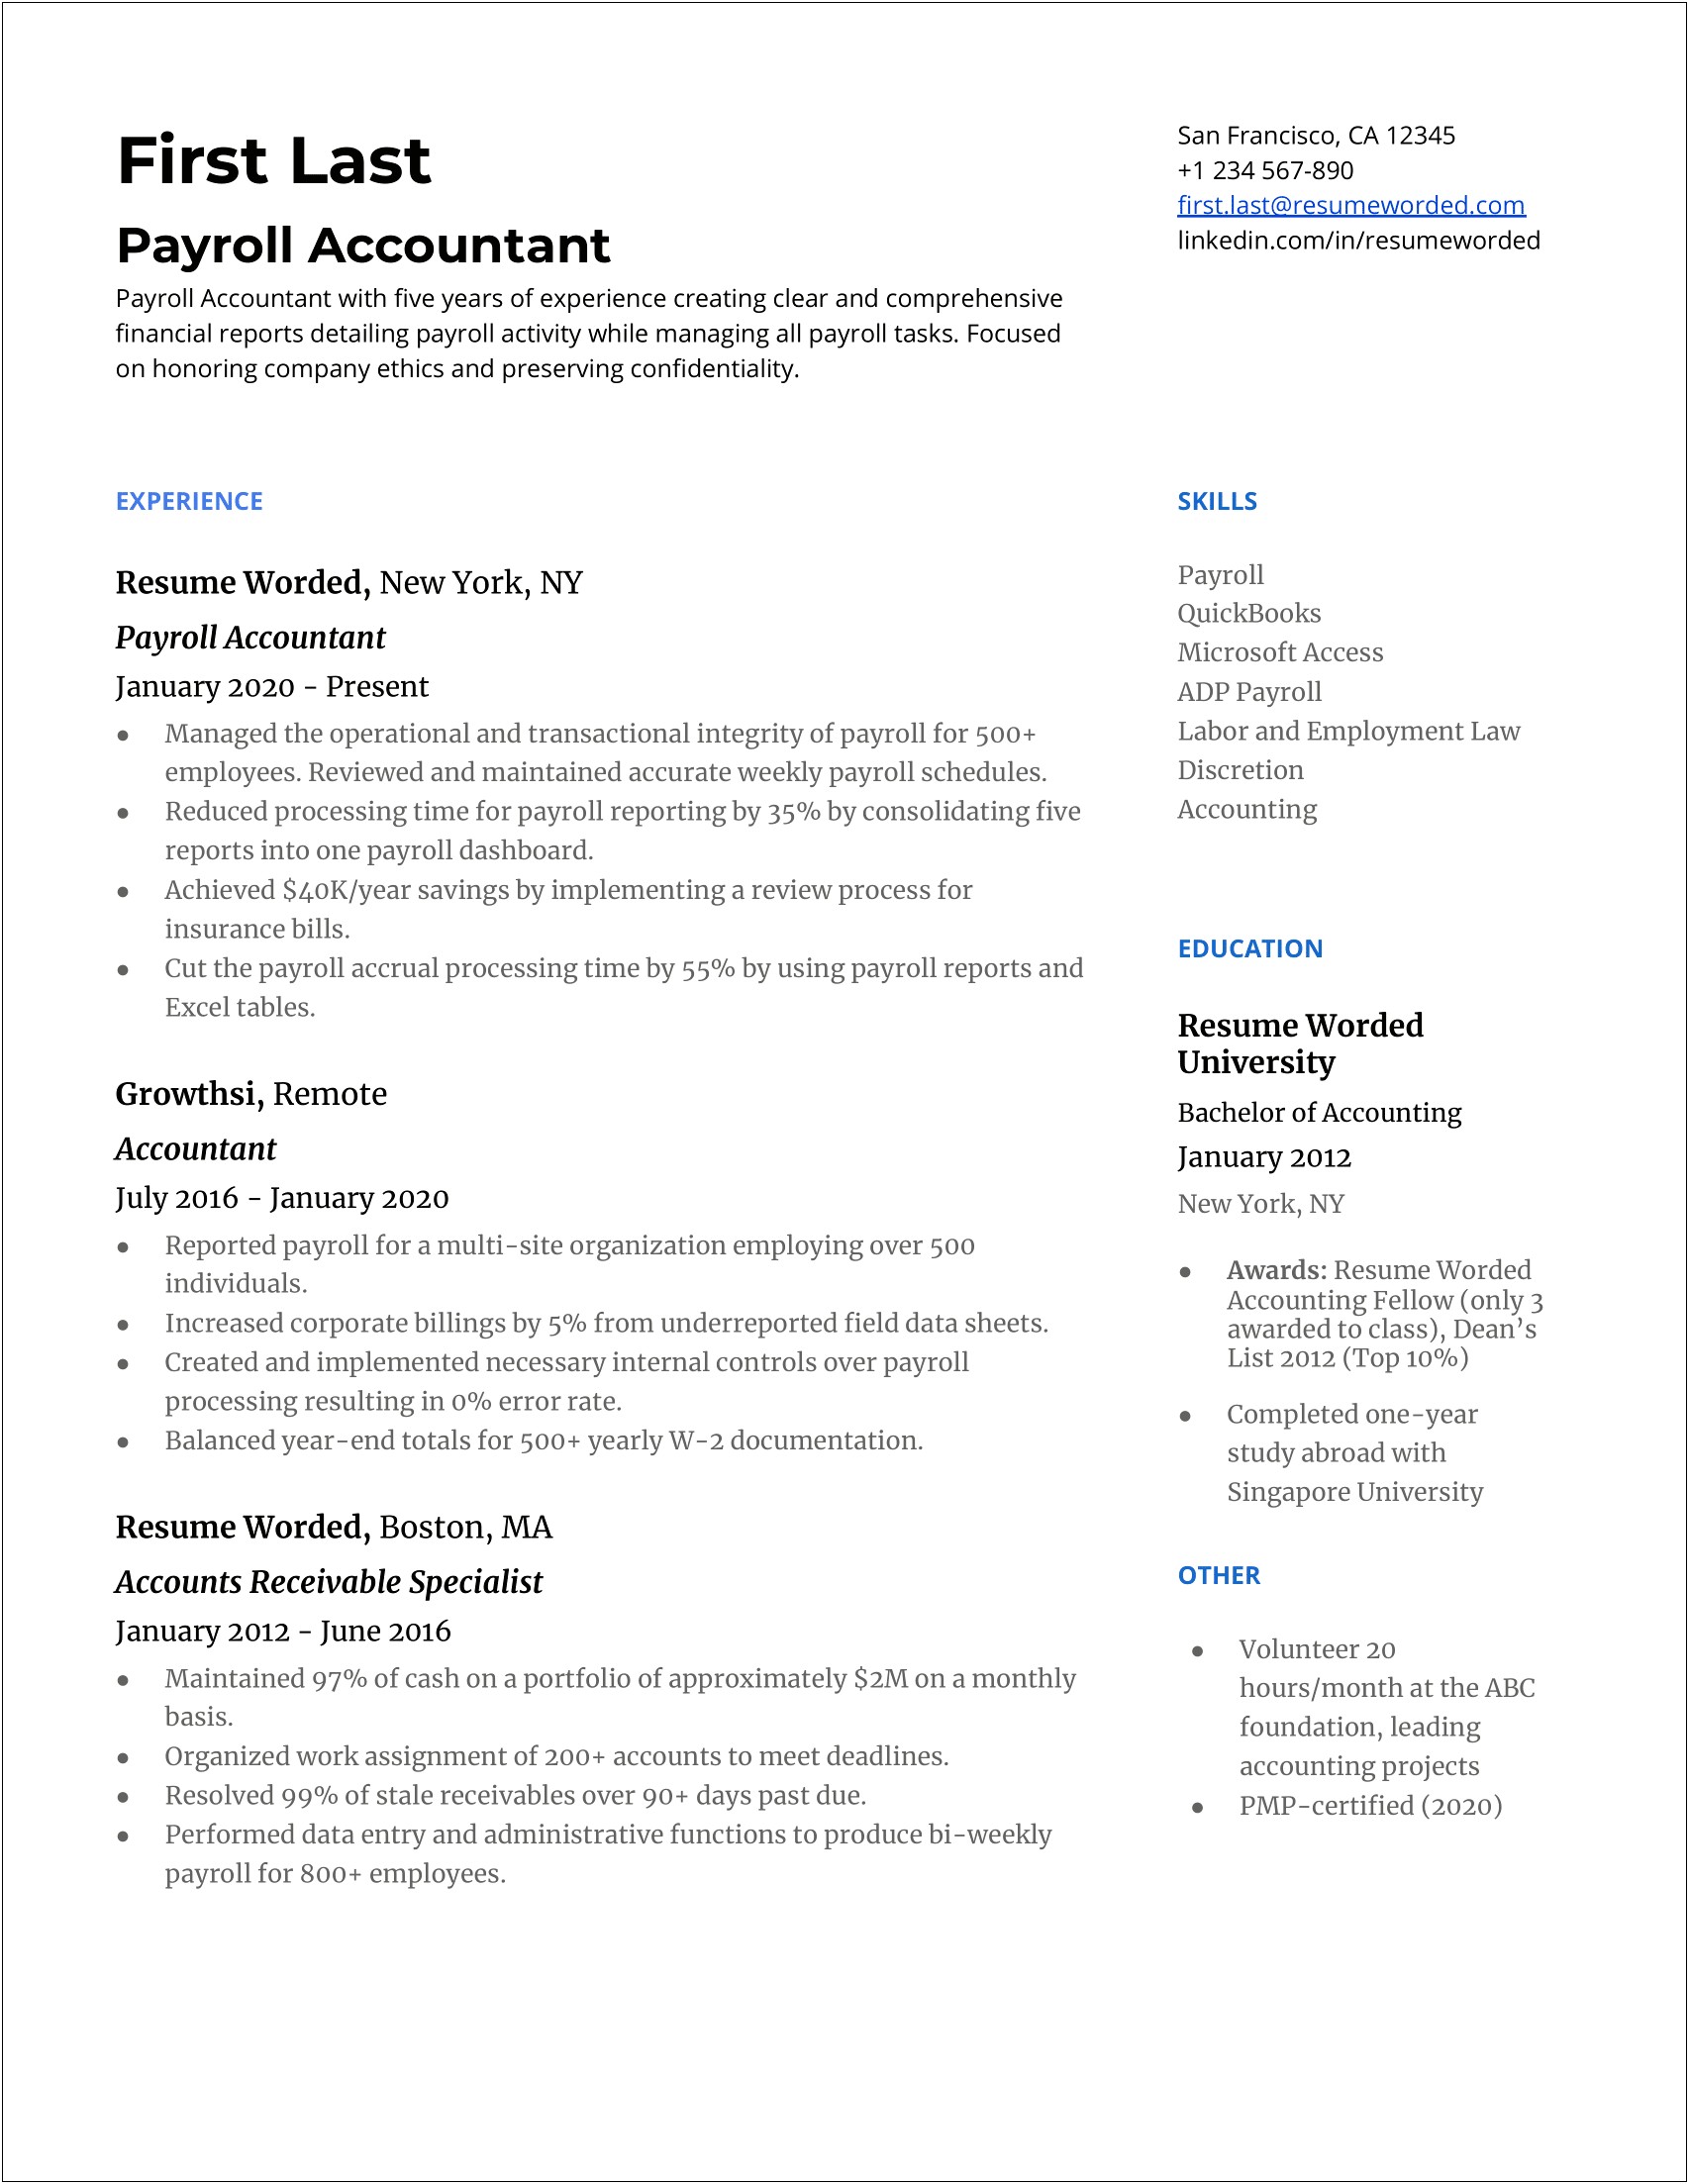 Tailor Resume To Job Title